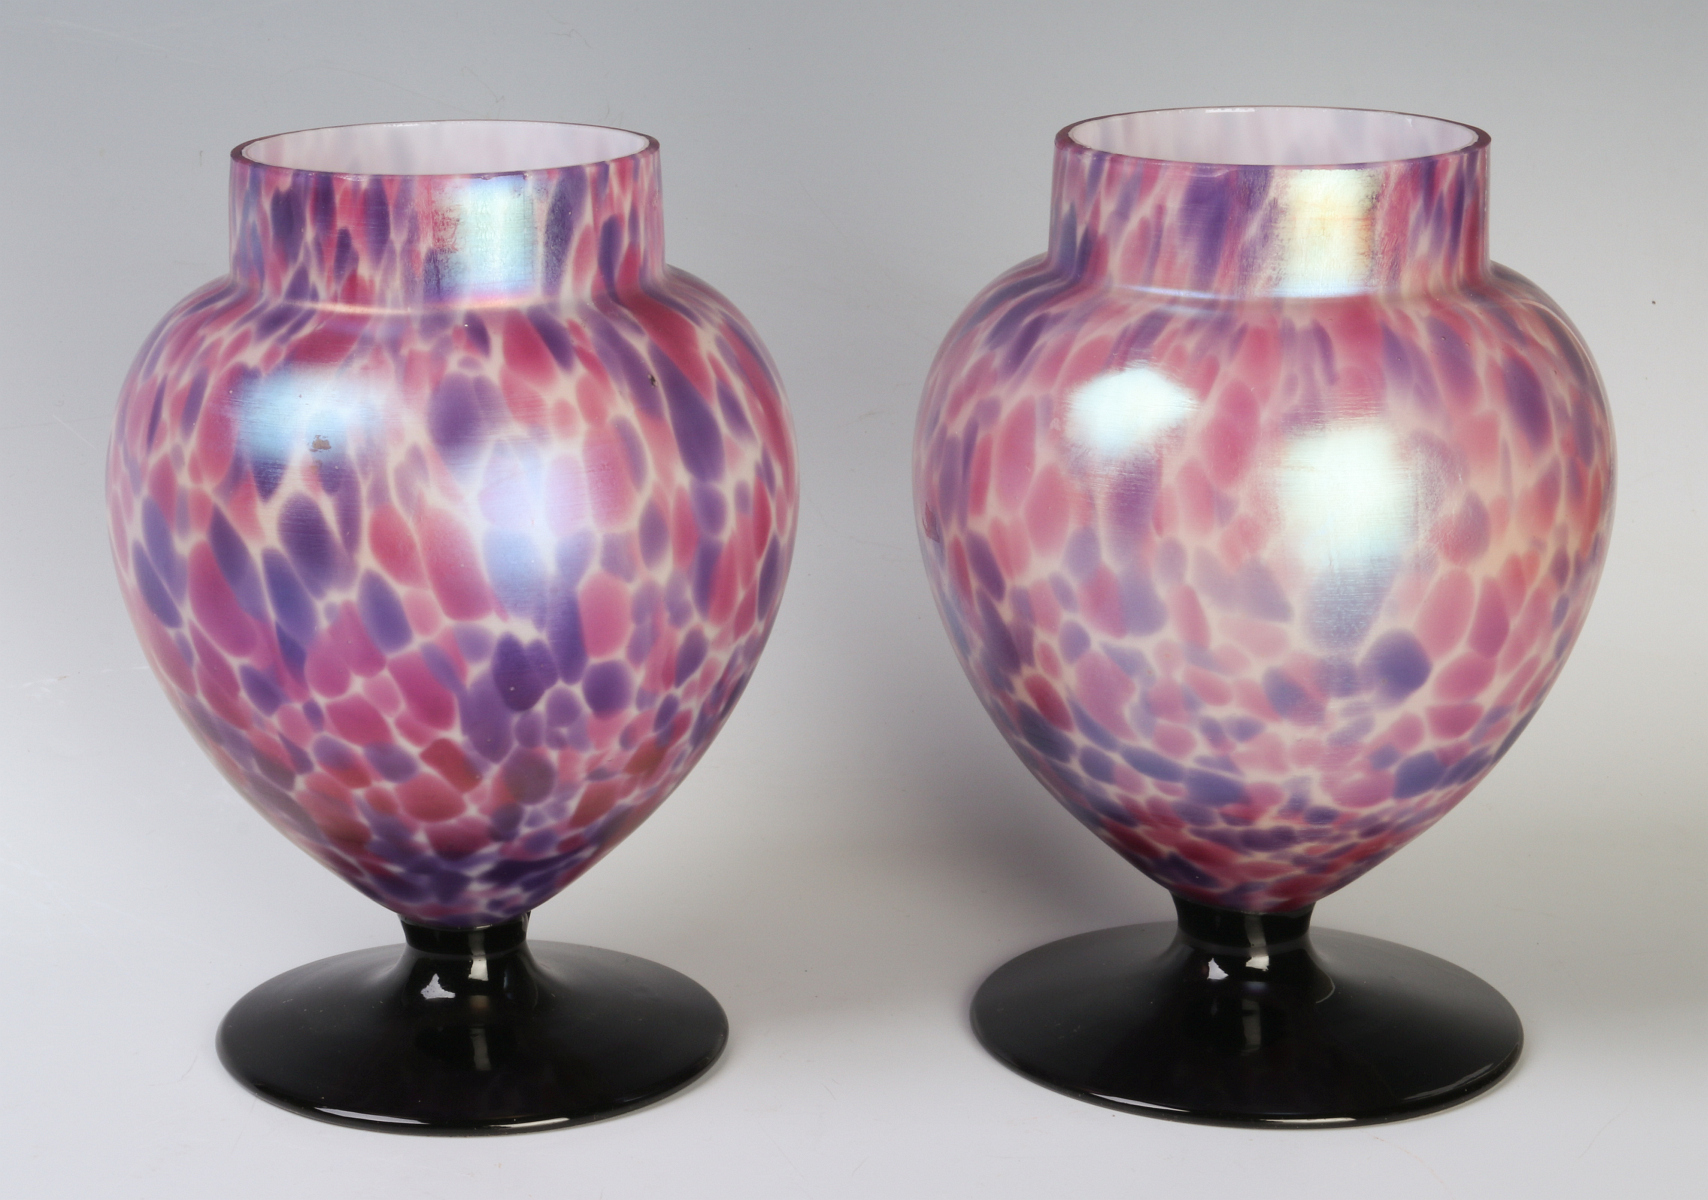 A PAIR OF FOOTED ART GLASS VASES ATTR AS CZECH